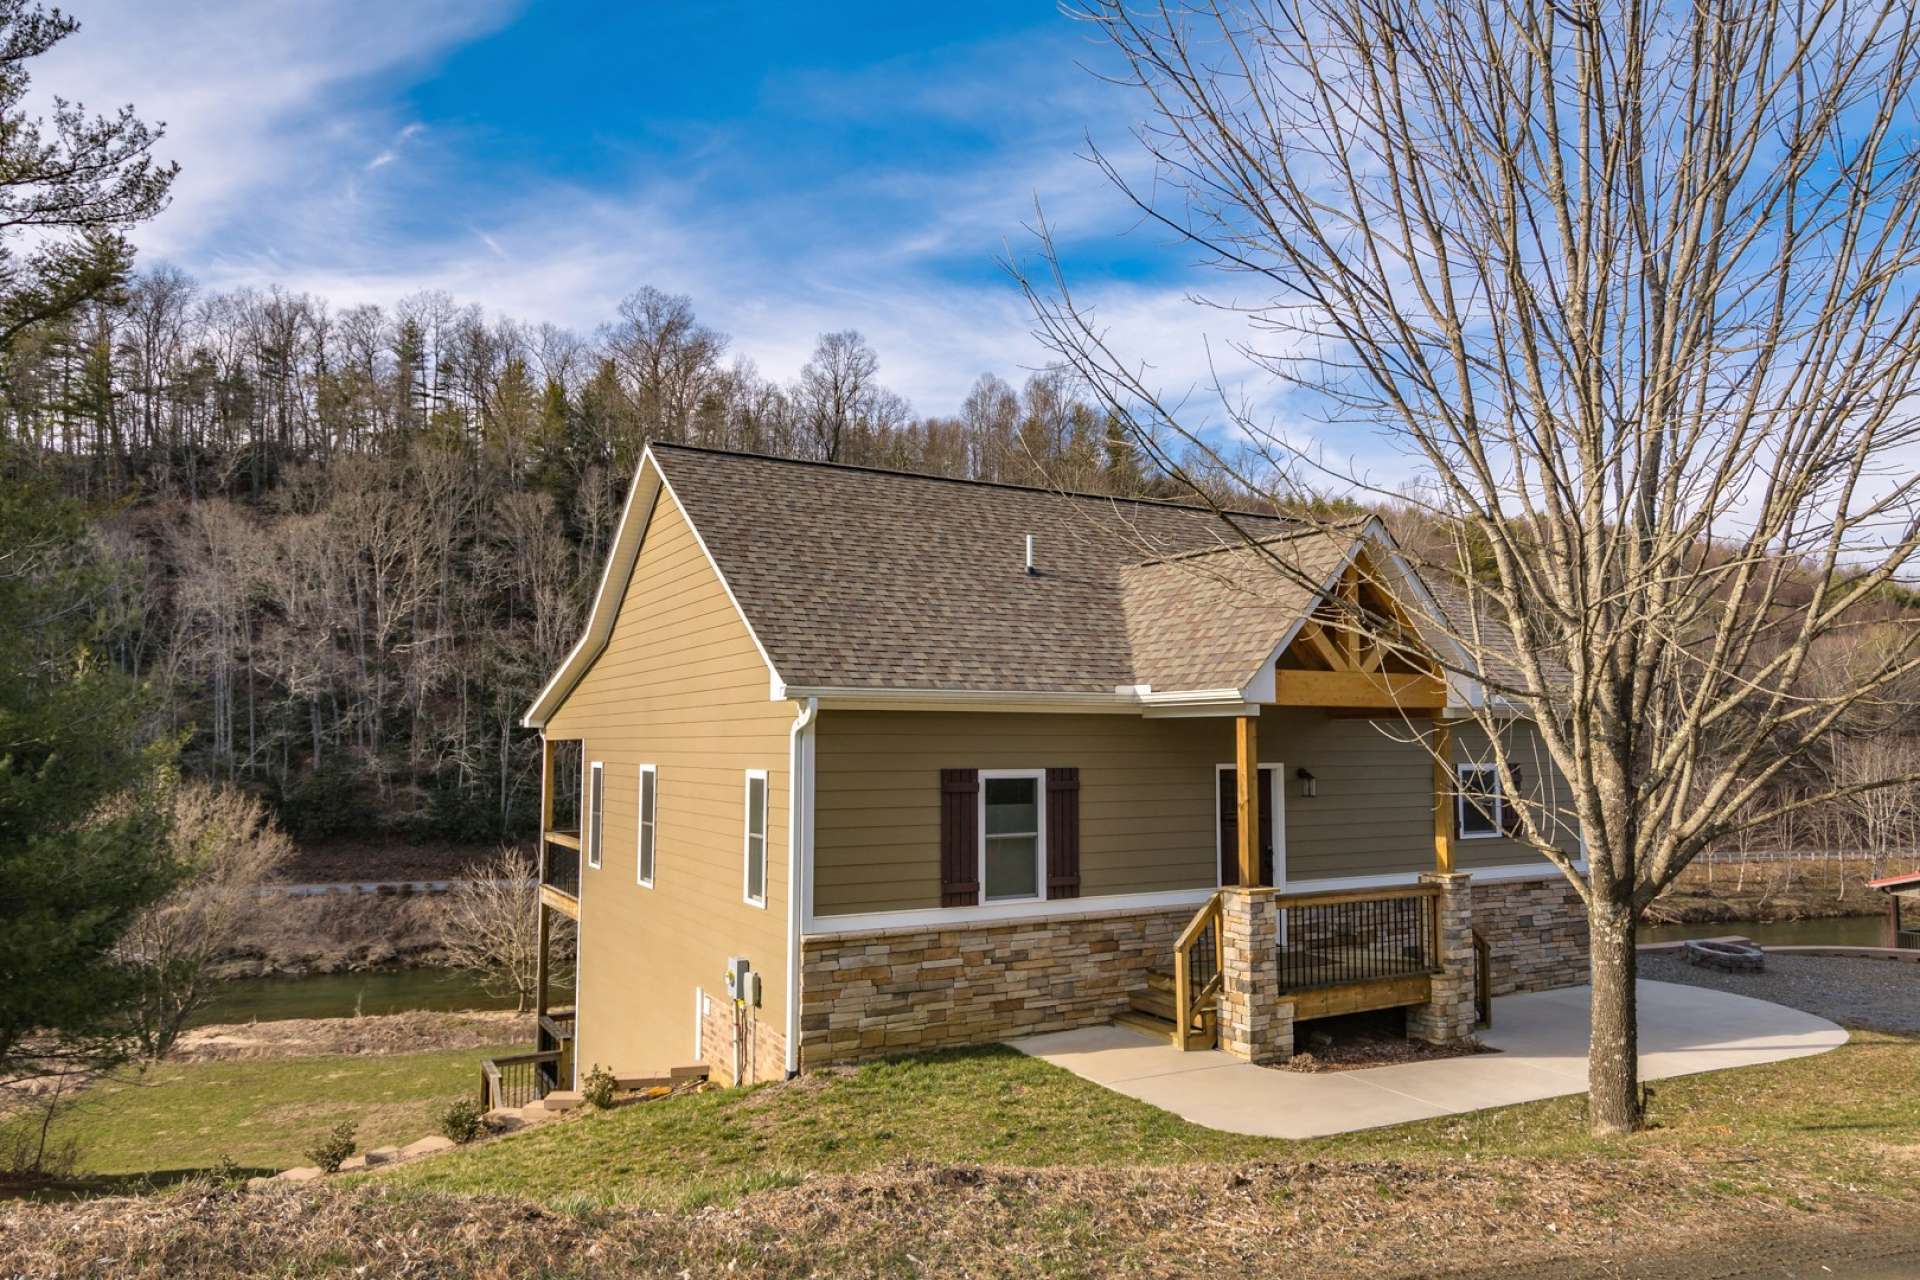 <b>Offered at $349,900, this exciting Craftsman style home on the banks of the New River in the Todd area of Southern Ashe County is the ideal solution for your NC Mountain home or high country retreat. Call today for additional information on listing S174.  *Also offered with an additional lot for a total of 2.25 acres for $445,000</b>